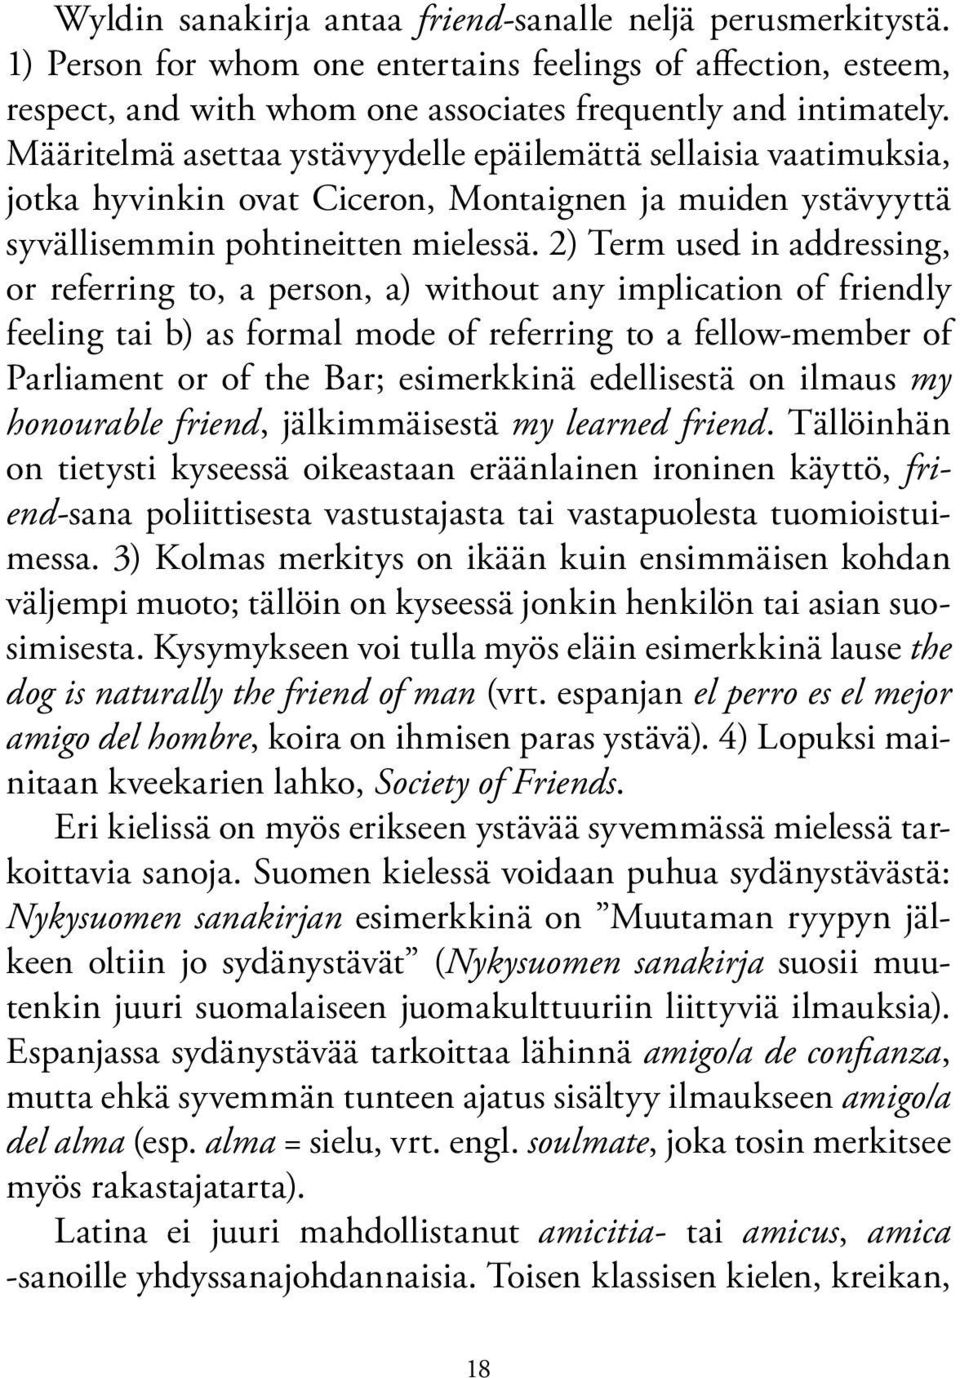 2) Term used in addressing, or referring to, a person, a) without any implication of friendly feeling tai b) as formal mode of referring to a fellow-member of Parliament or of the Bar; esimerkkinä